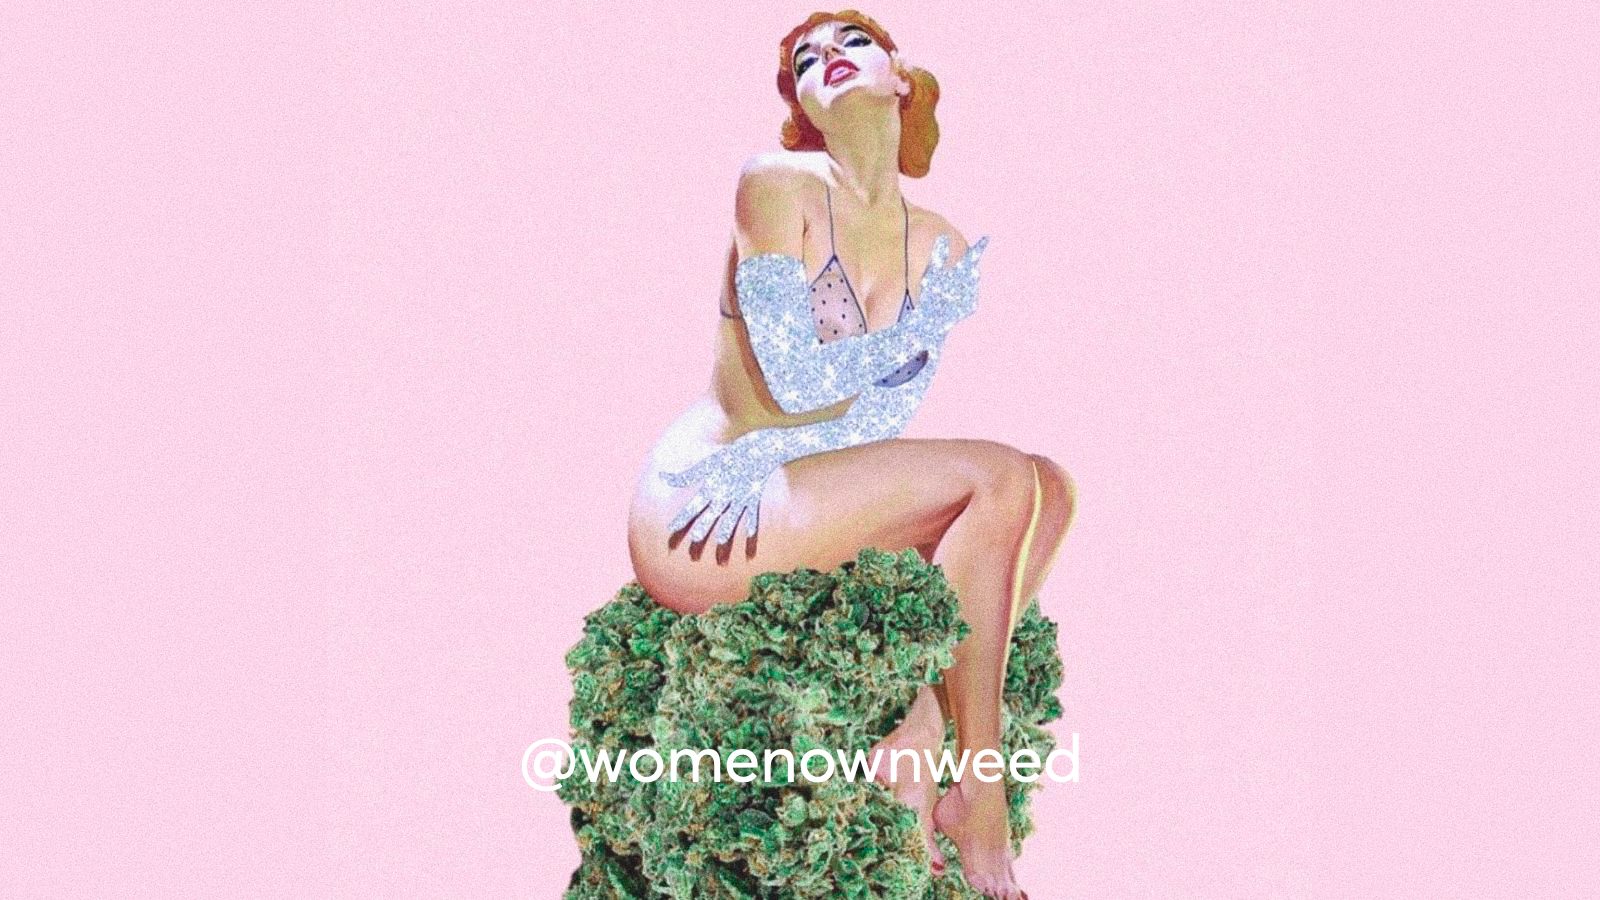 A collage art of a women sitting on a piece of cannabis buds